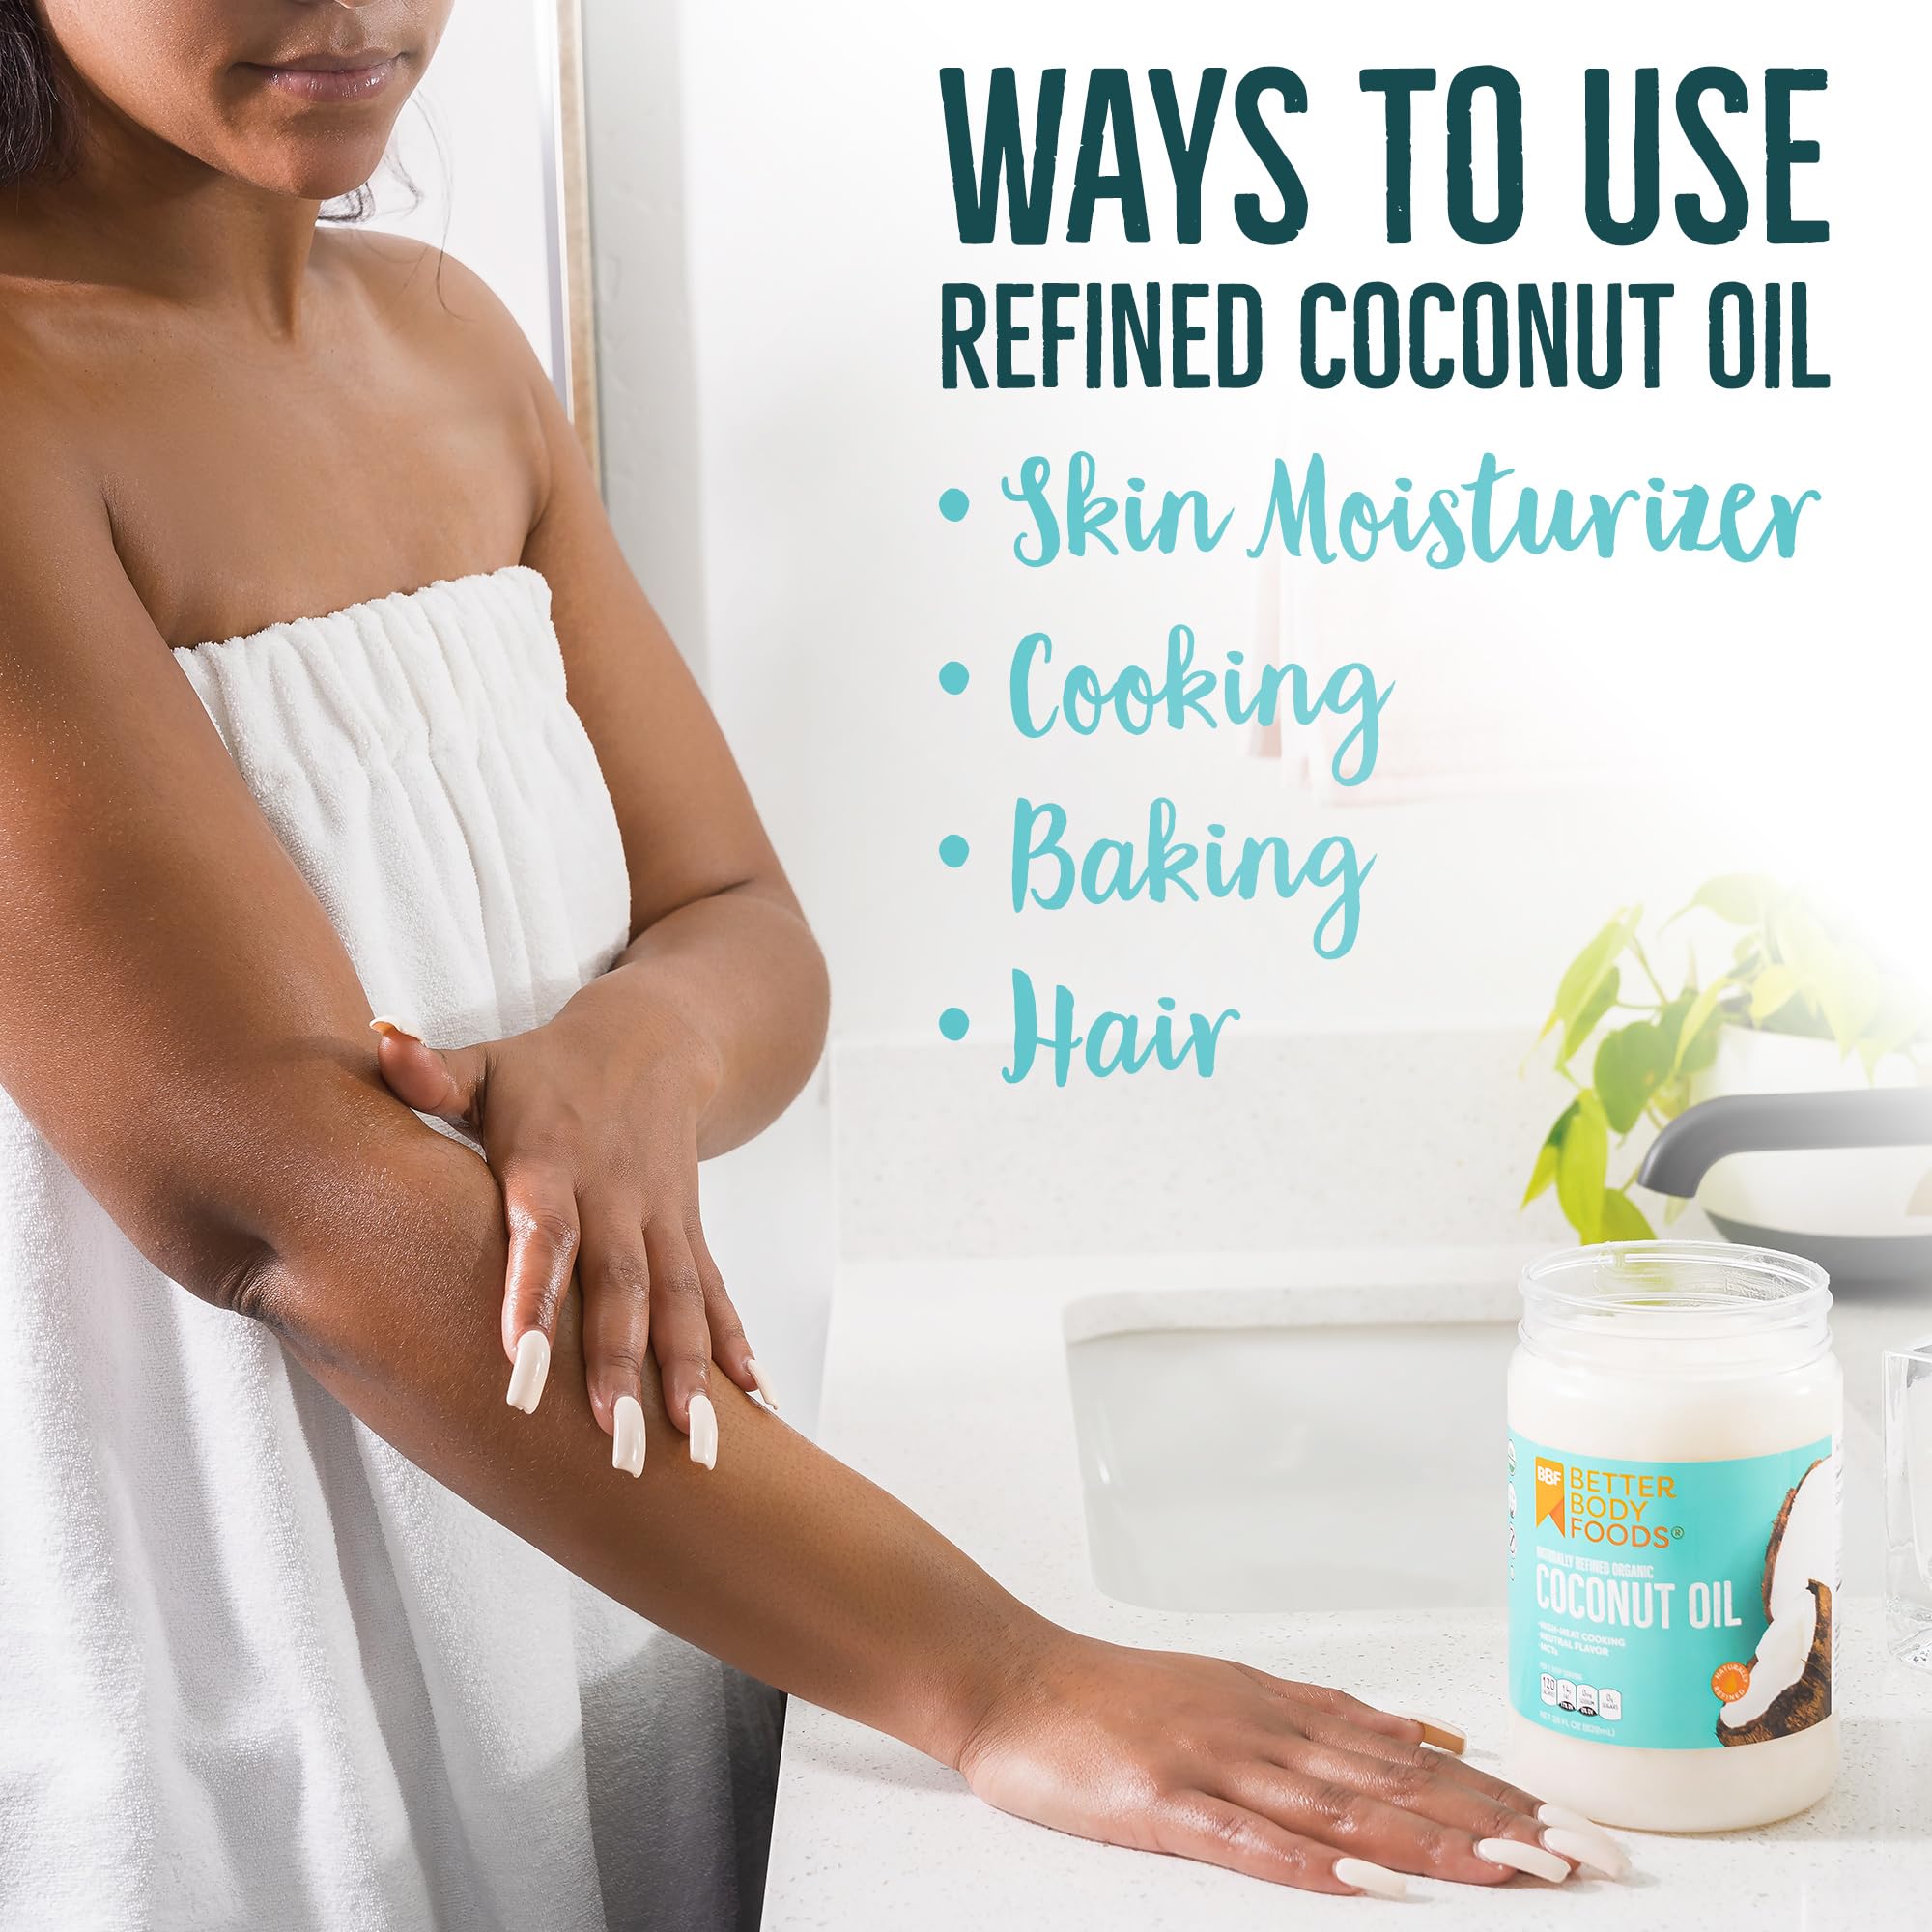 BetterBody Foods Organic, Naturally Refined Coconut Oil